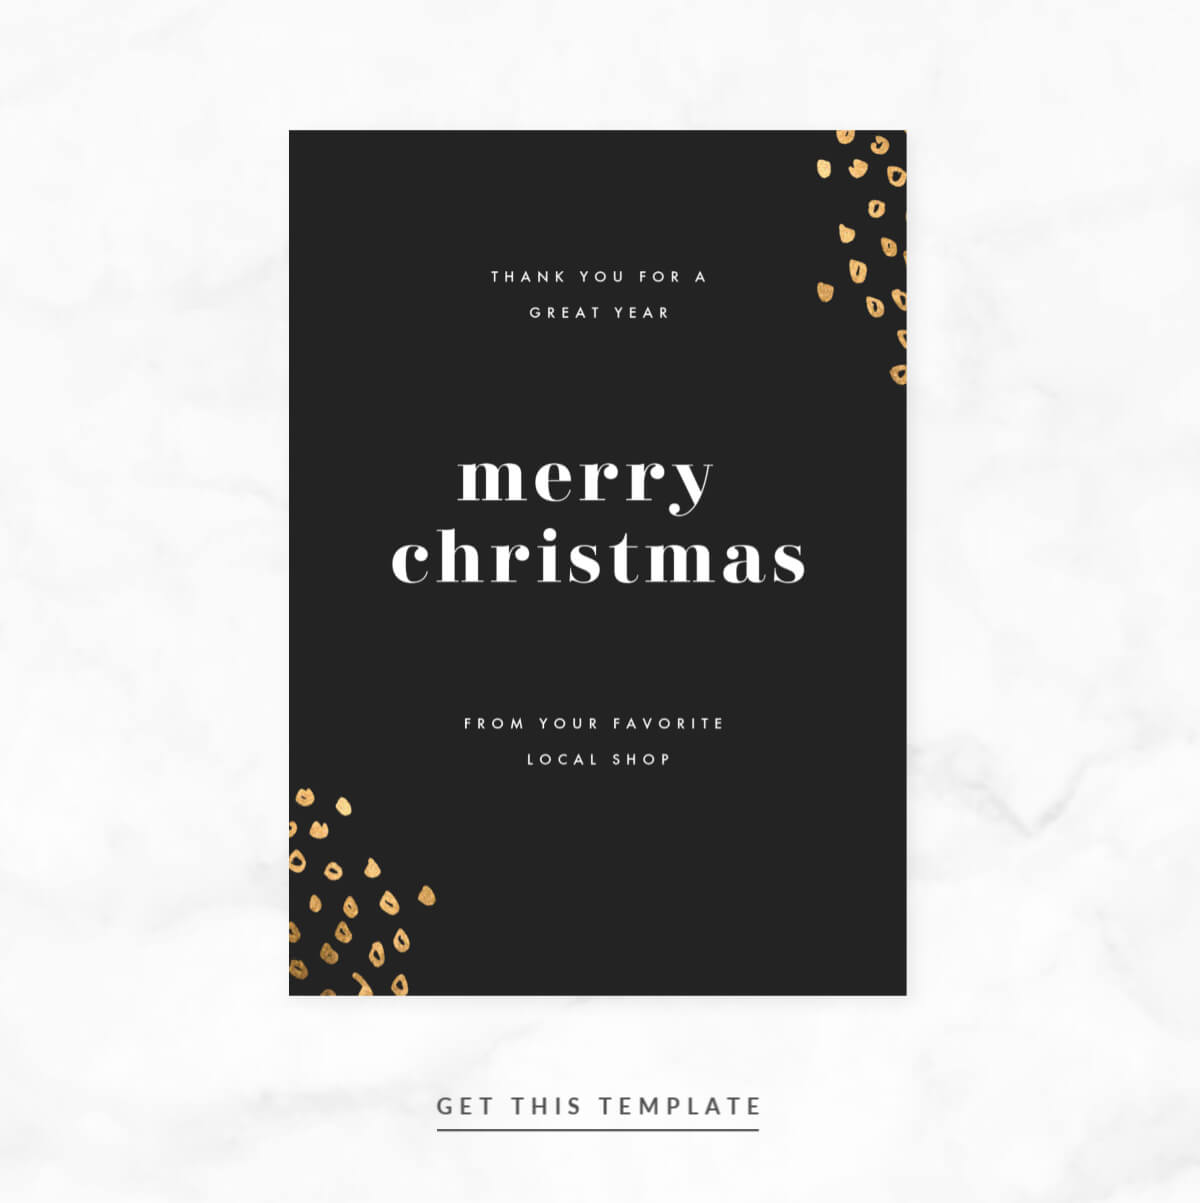 Craft The Perfect Christmas Card Messages | Picmonkey With Holiday Card Email Template